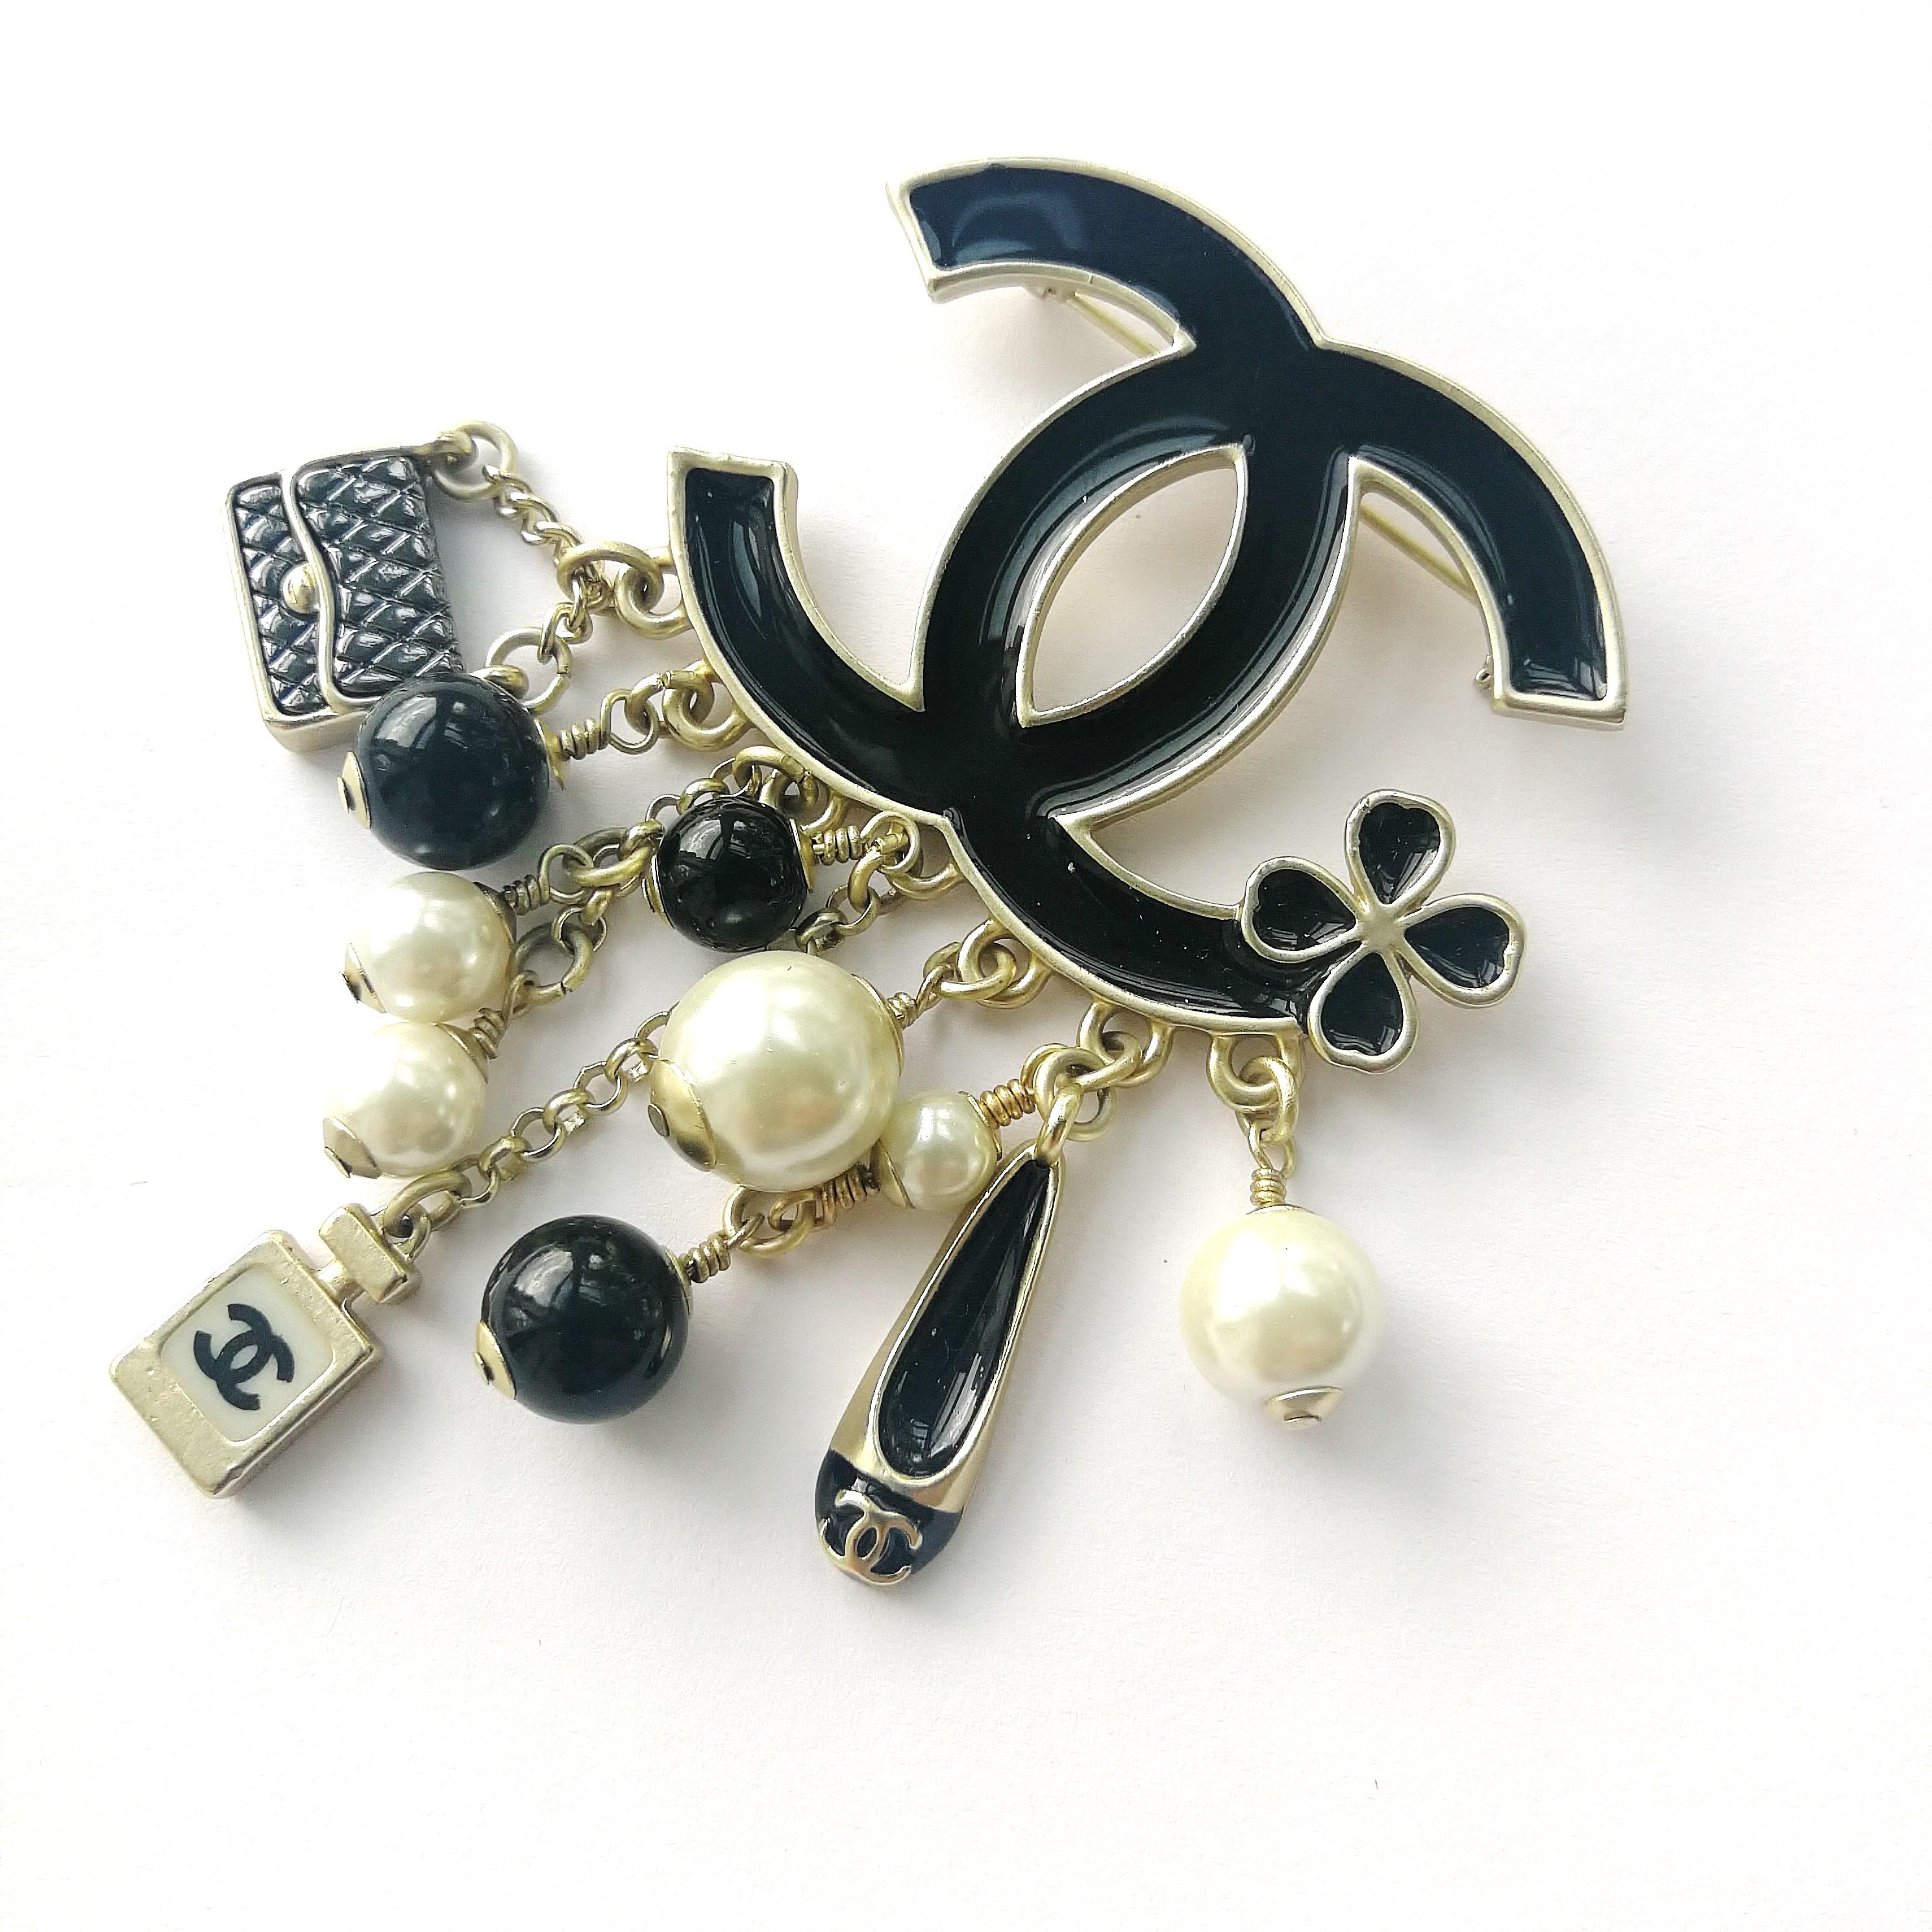 Created for the Autumn 2014 collection, this brooch full of iconic Chanel charms so characteristic of Chanel creations in the last decade or so, is such a Chanel classic.
Made by Desrues, the current maker of Chanel jewellery, the charms of the